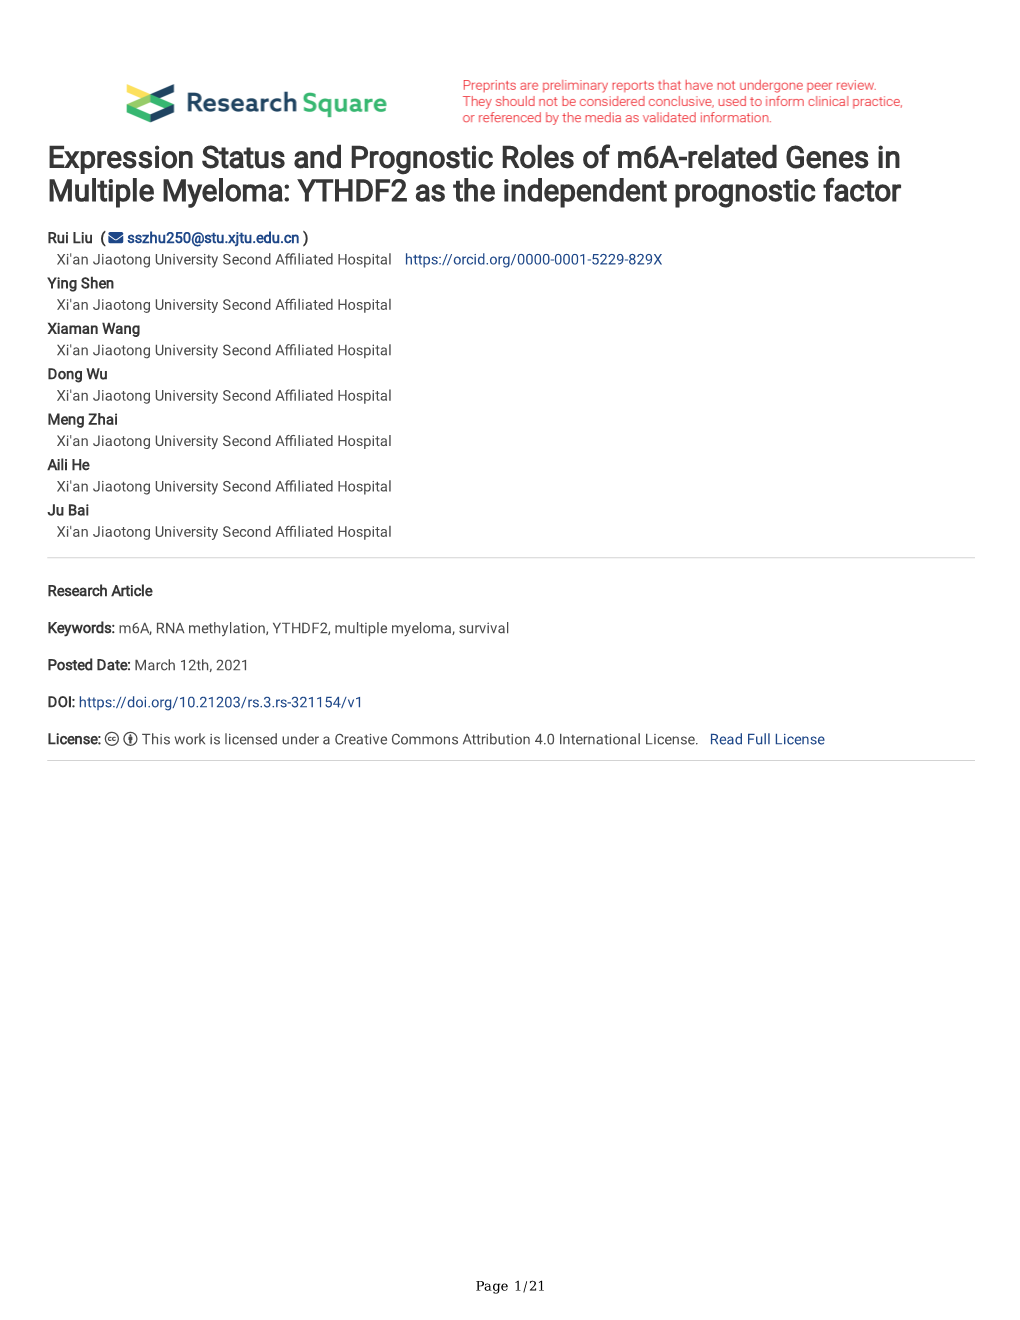 Expression Status and Prognostic Roles of M6a-Related Genes in Multiple Myeloma: YTHDF2 As the Independent Prognostic Factor